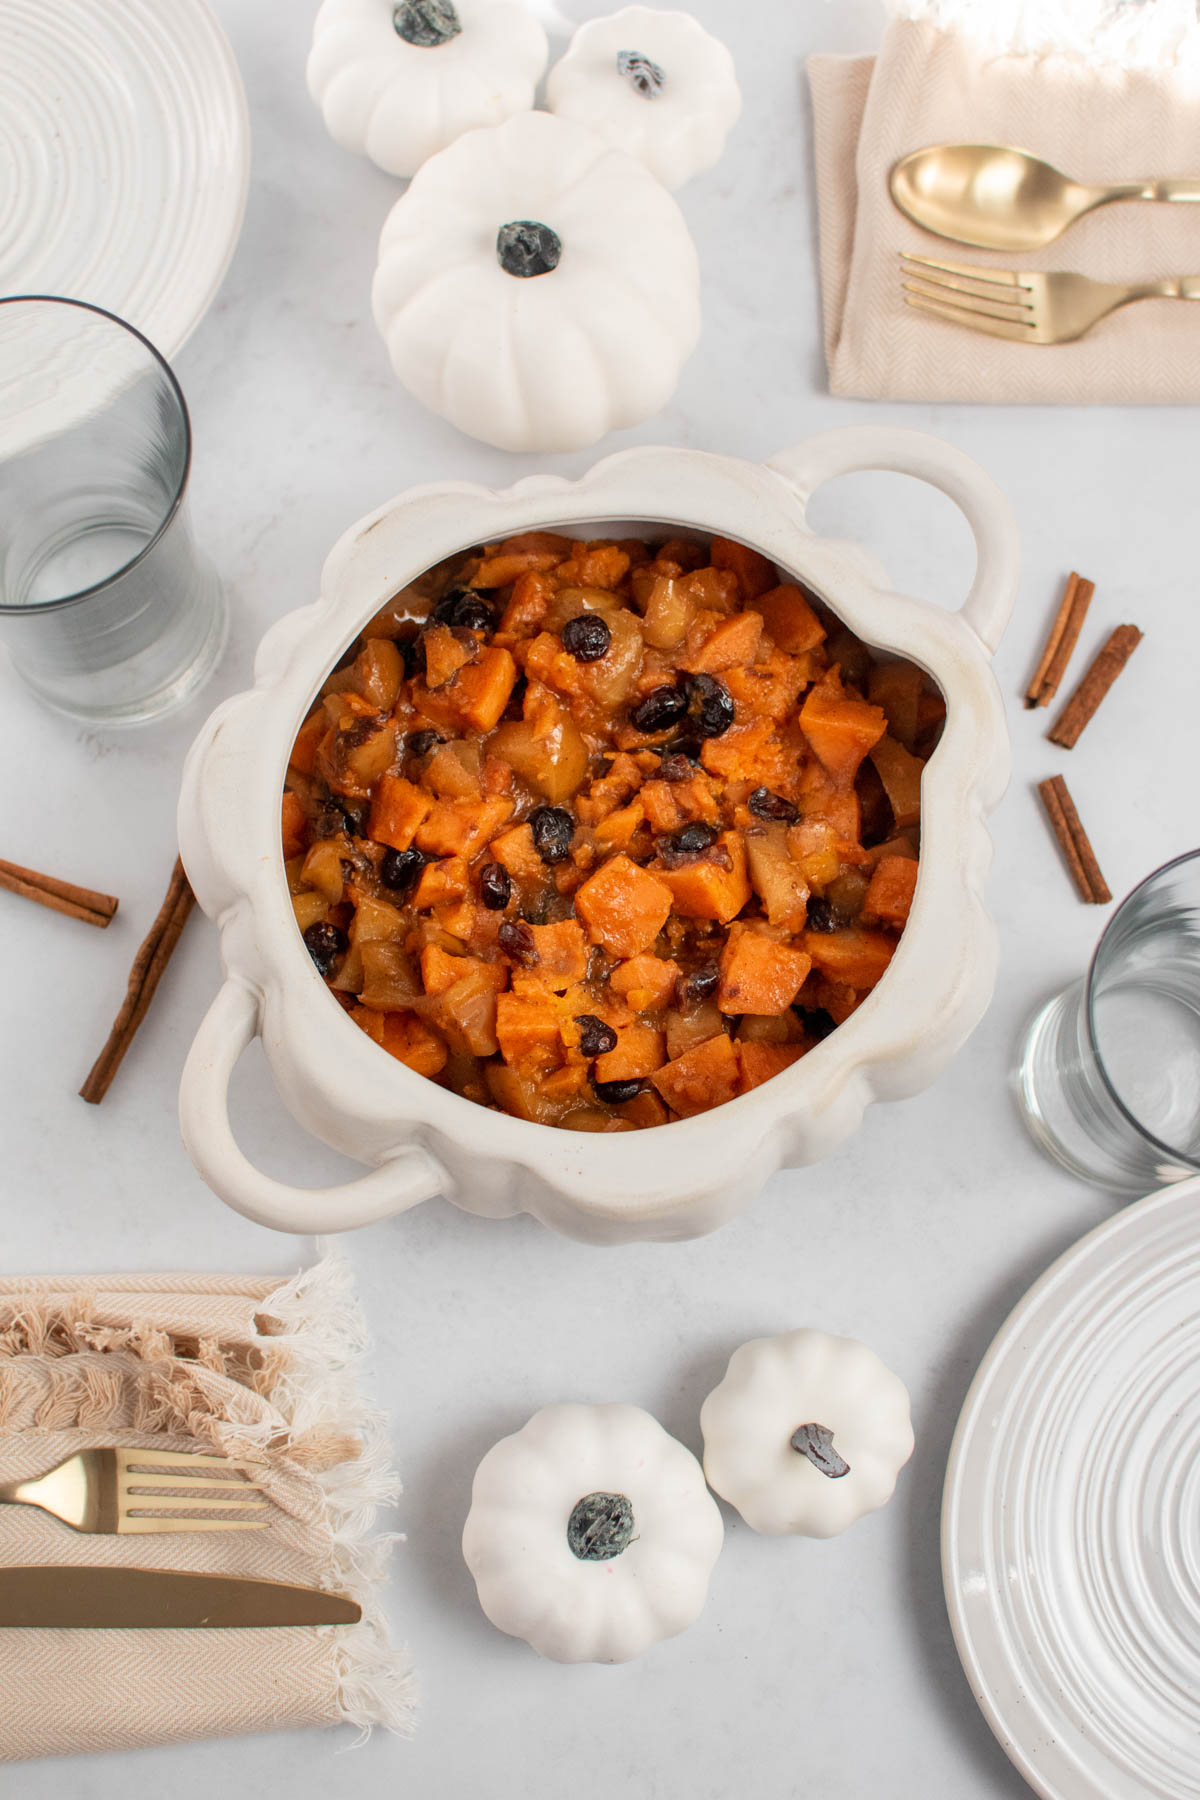 Crock Pot sweet potatoes in white pumpkin dish on table with place settings and white pumpkin decor.